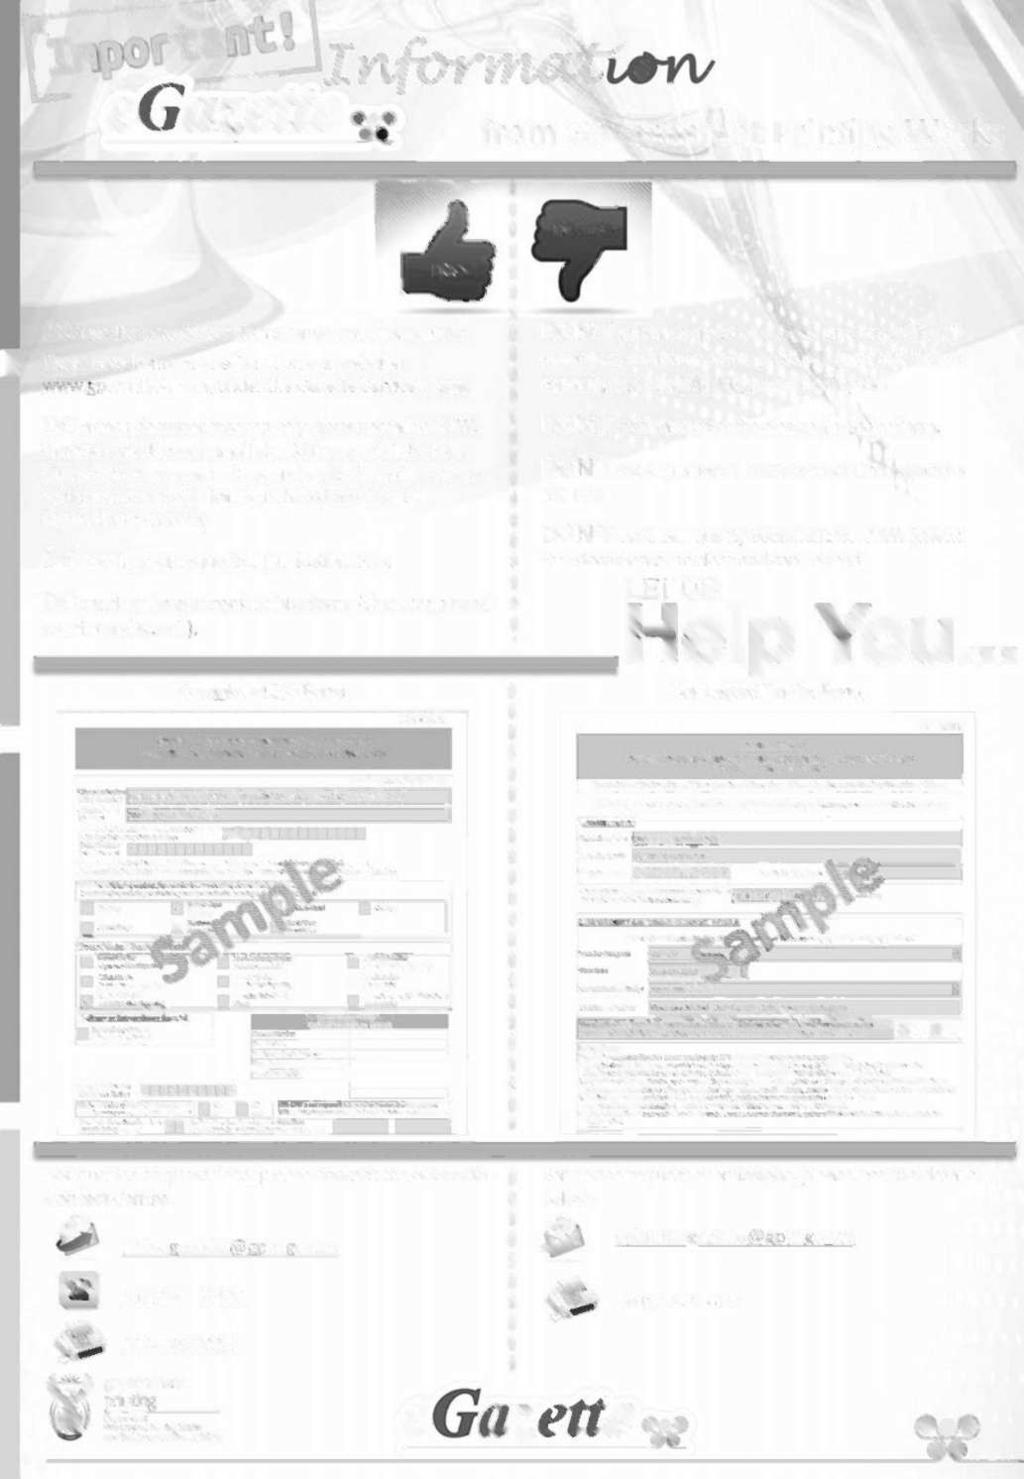 2 No. 38603 GOVERNMENT GAZETTE, 27 MARCH 2015 egazette I nitheittaruniev from Government Printing Works DON'TS DO use the new Adobe Forms for your notice request.